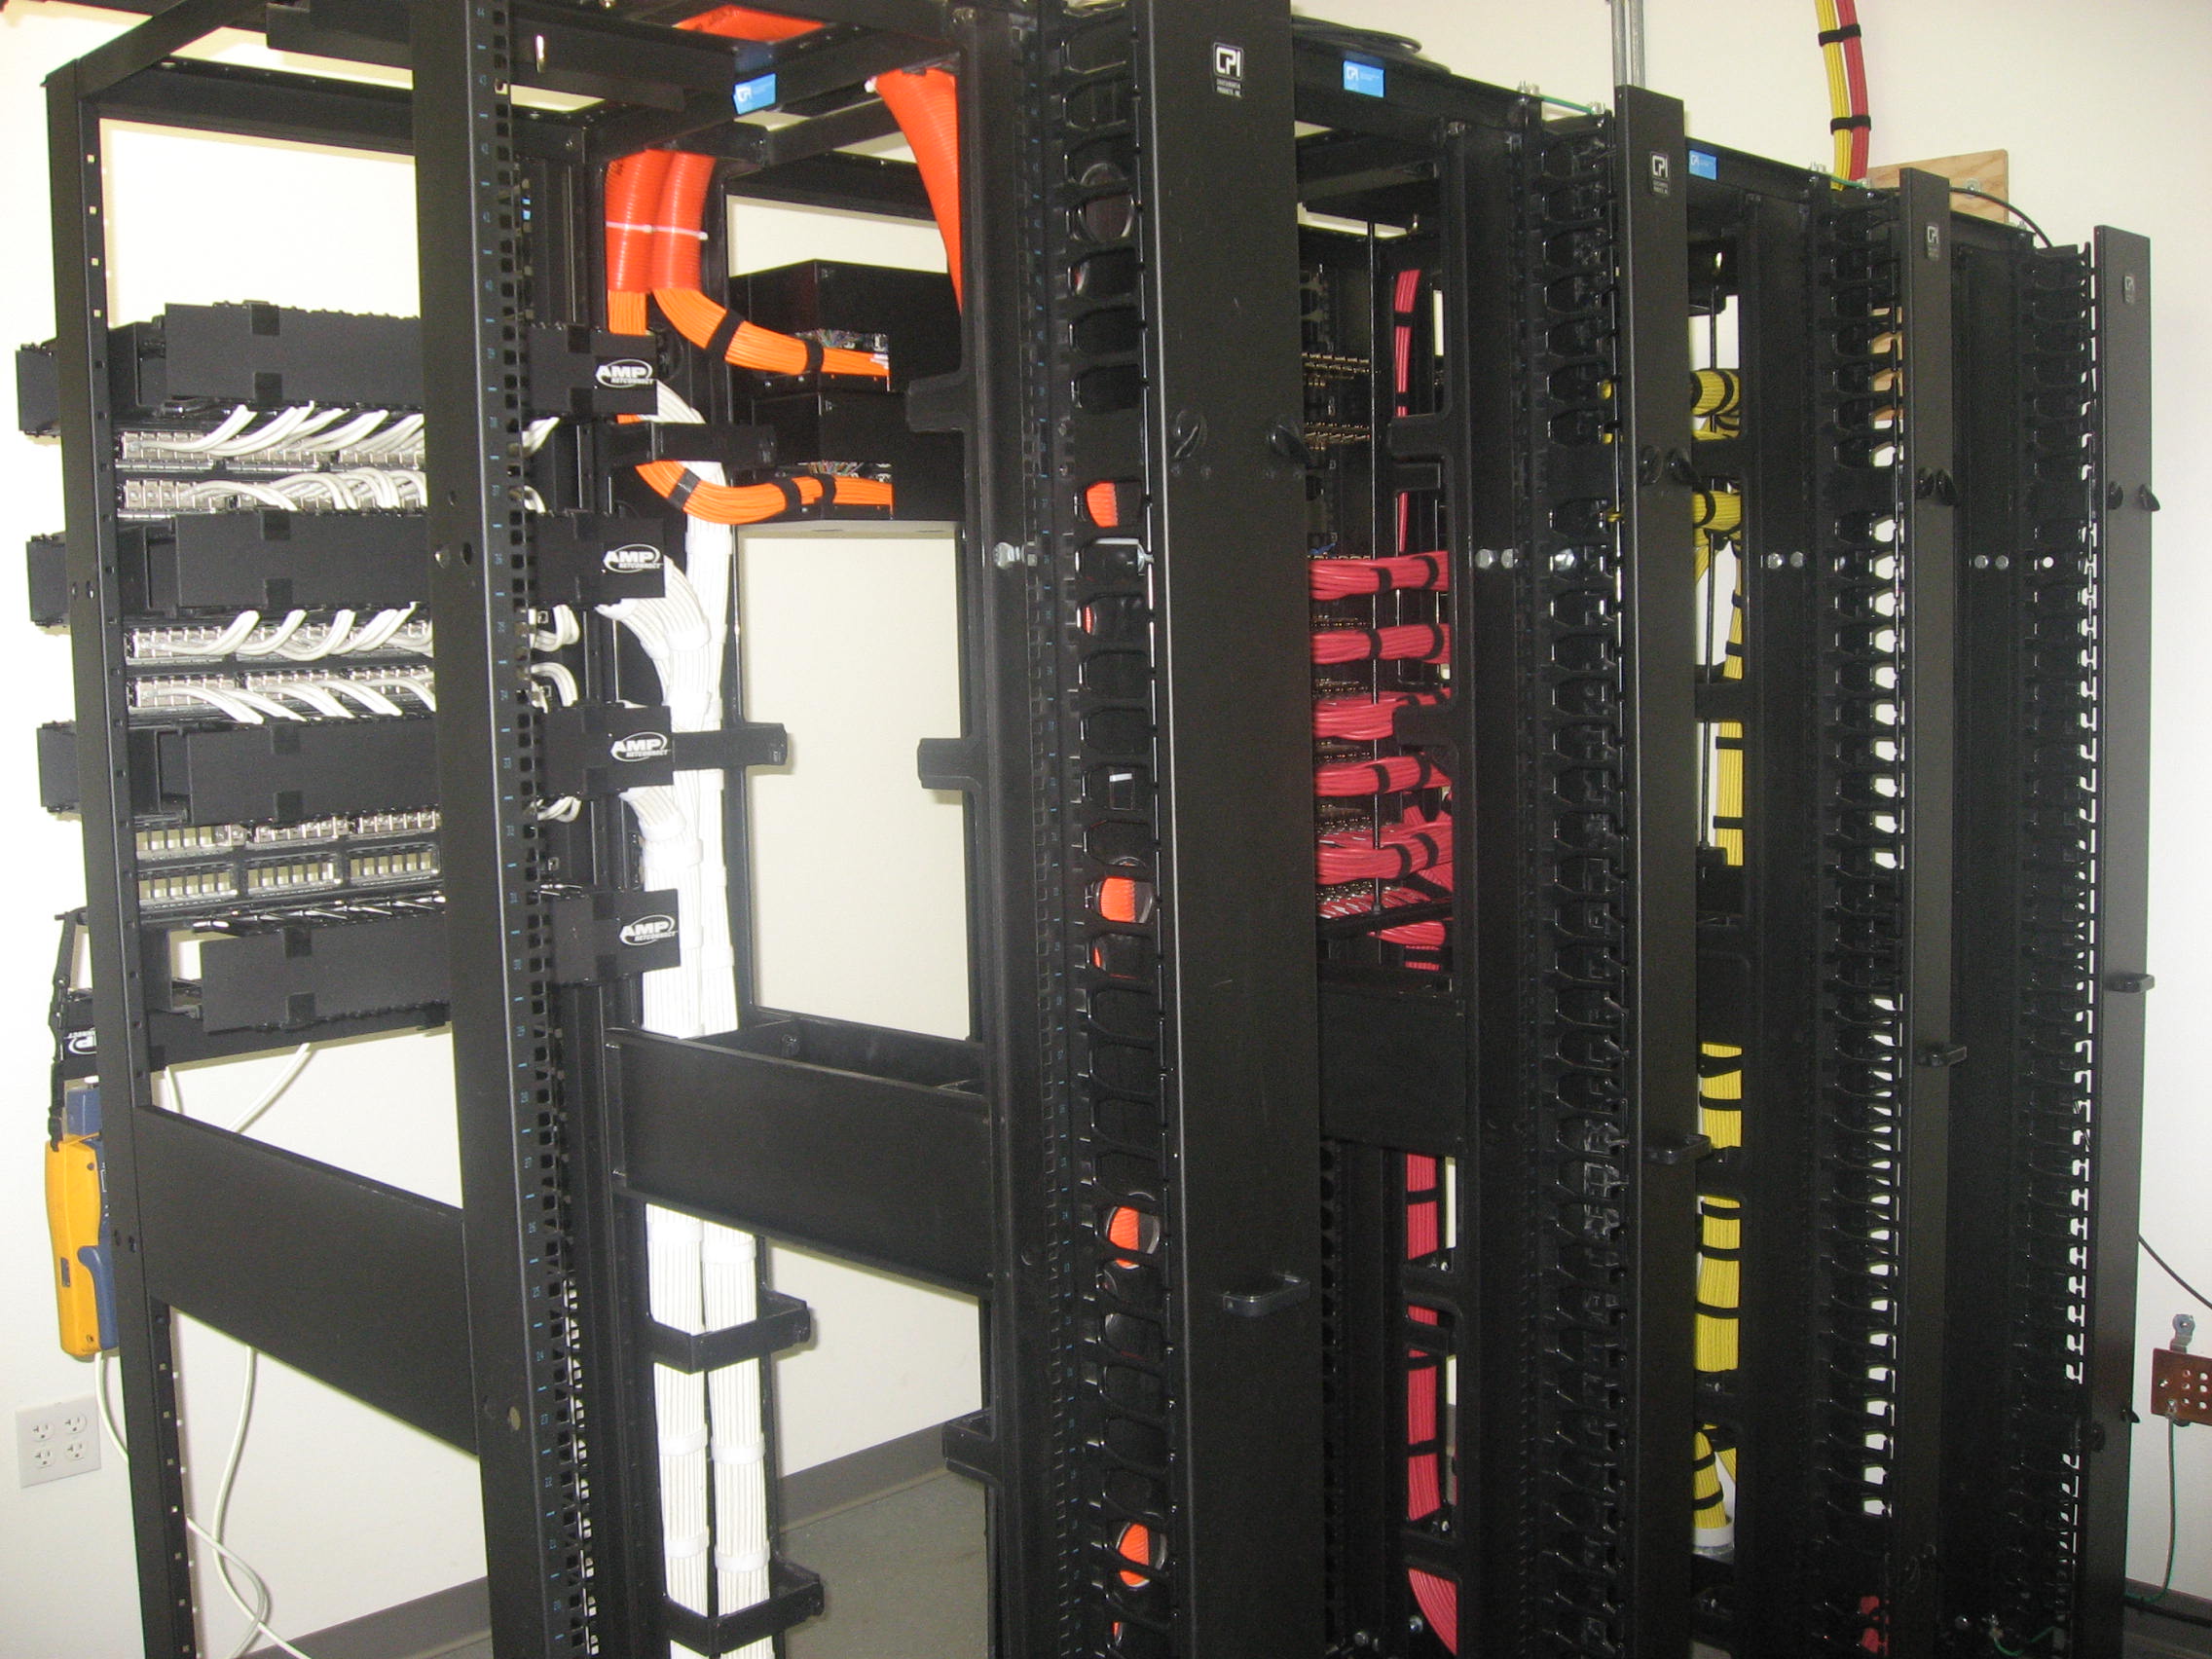 Full CAT 6 Ethernet Racks with Cable Management